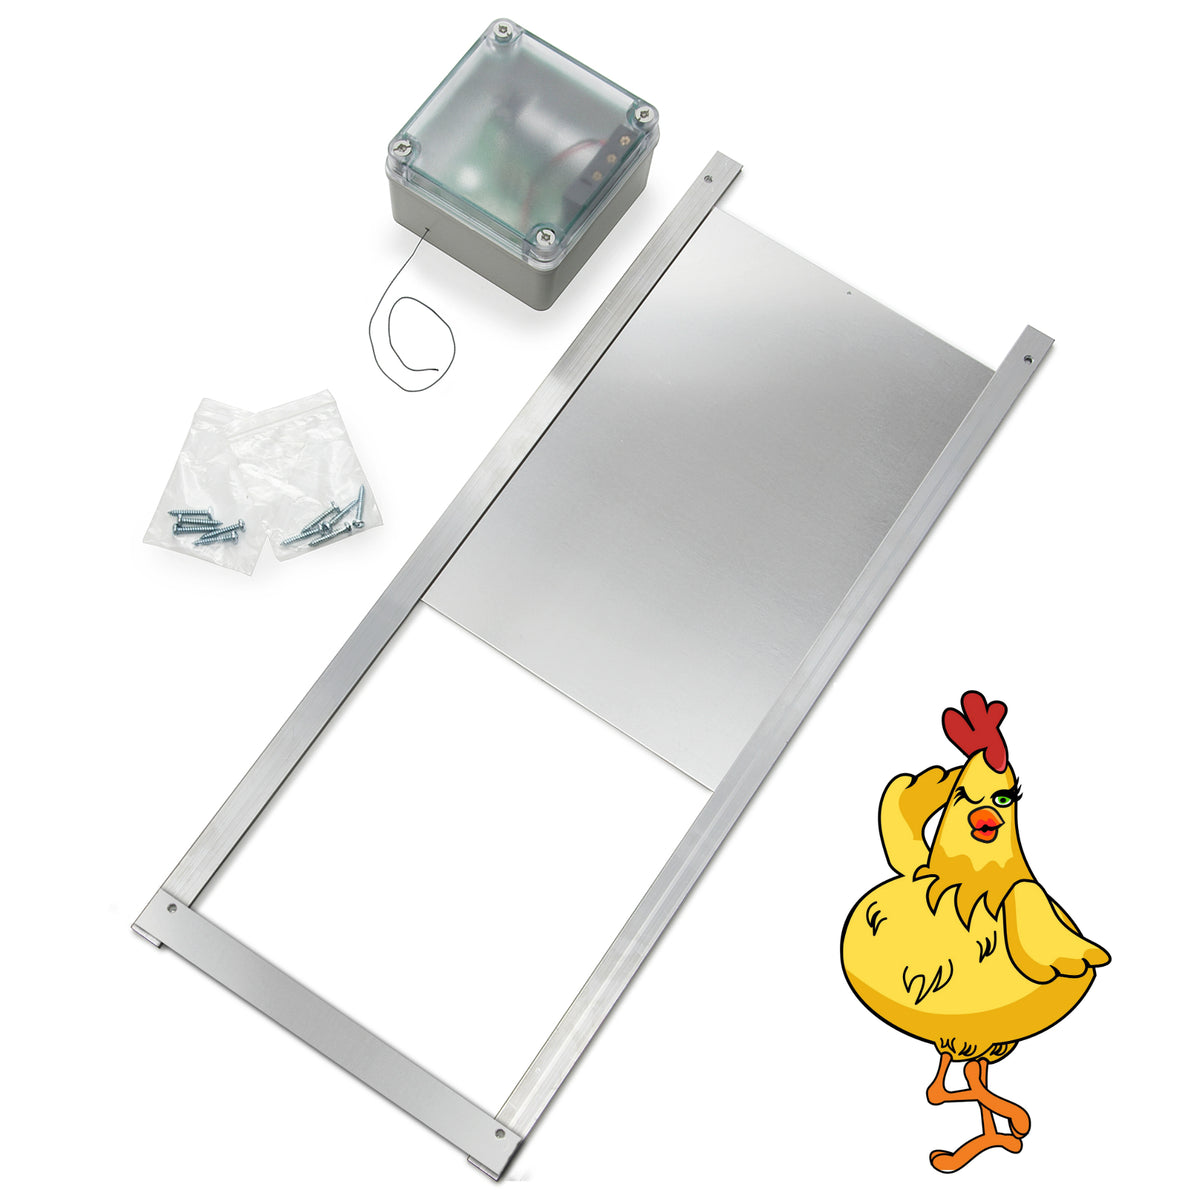 Weatherproof Remote Hipykat Automatic Chicken Coop Door Predator Resistant Protection Function Fullmetal Opener Battery Powered with LCD Display Electric Open / Close with Timer Mode Light Sensor 